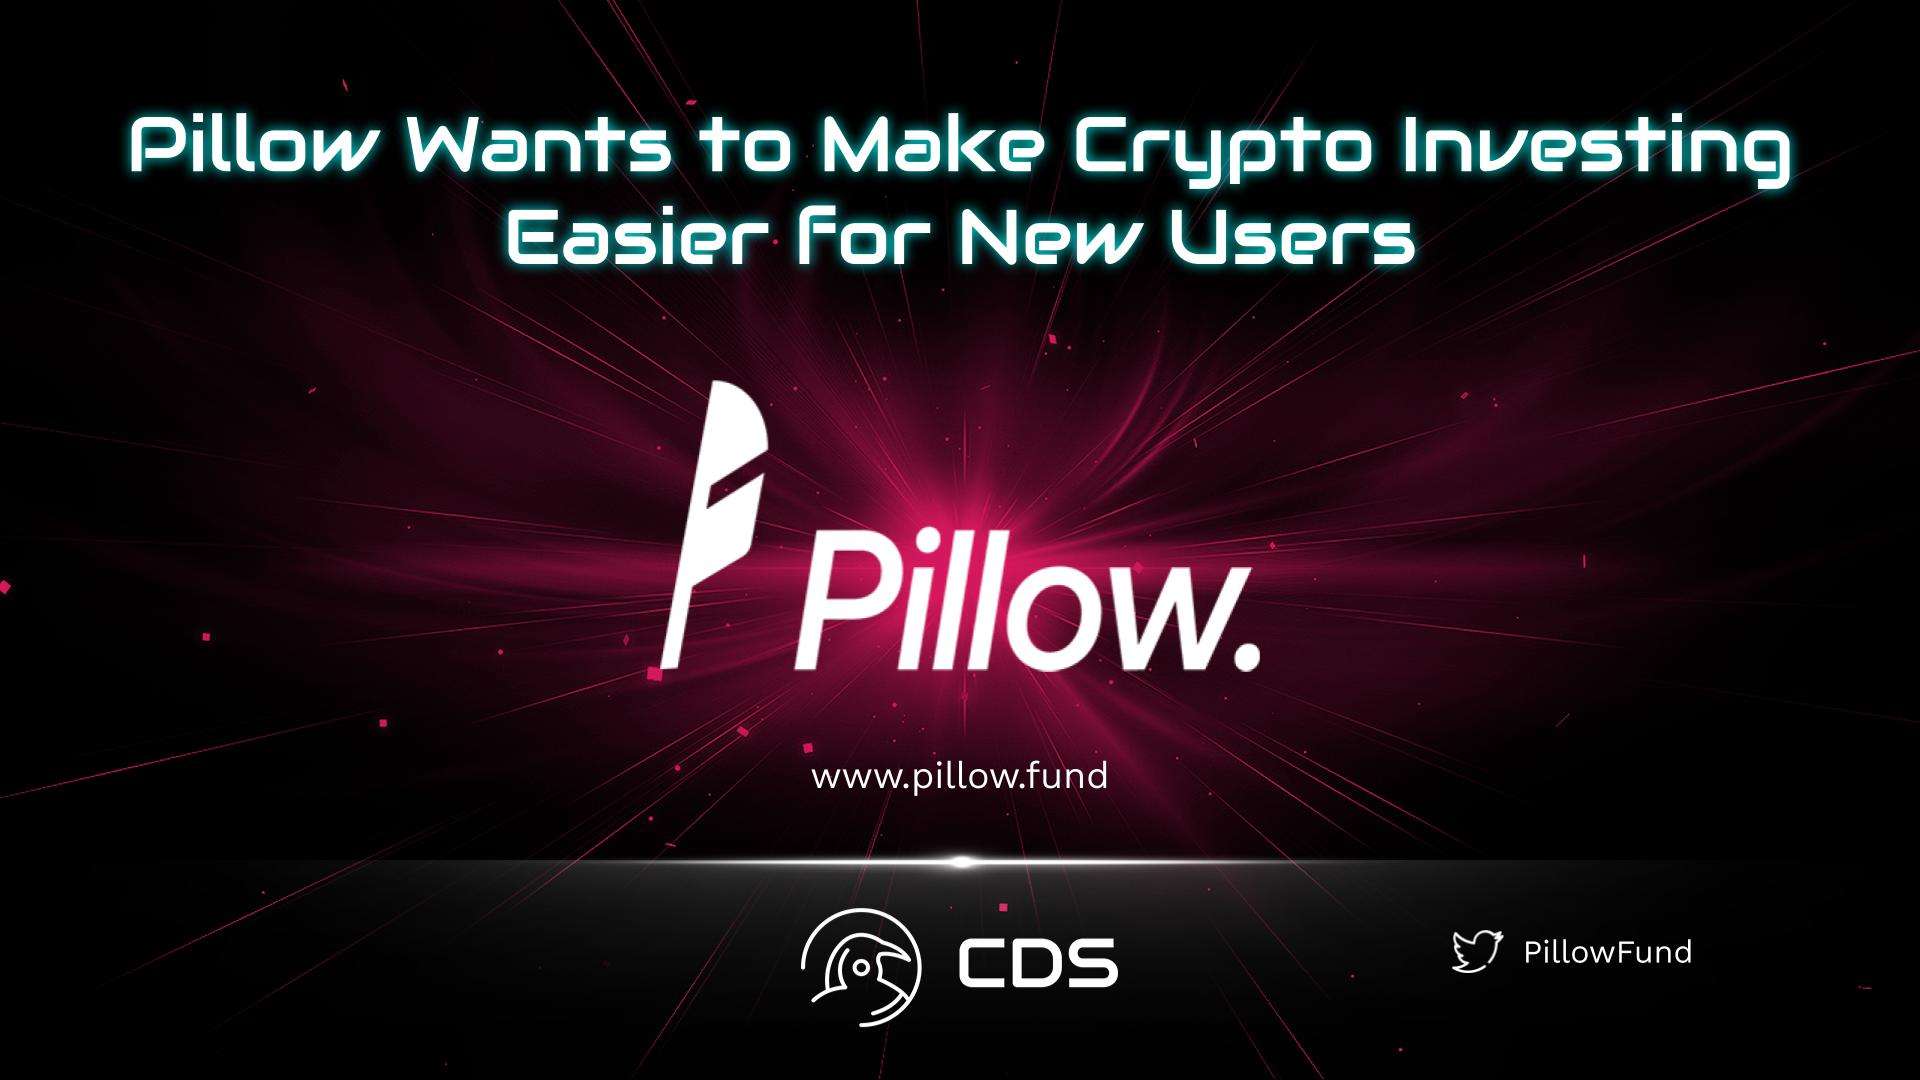 Pillow Wants to Make Crypto Investing Easier for New Users